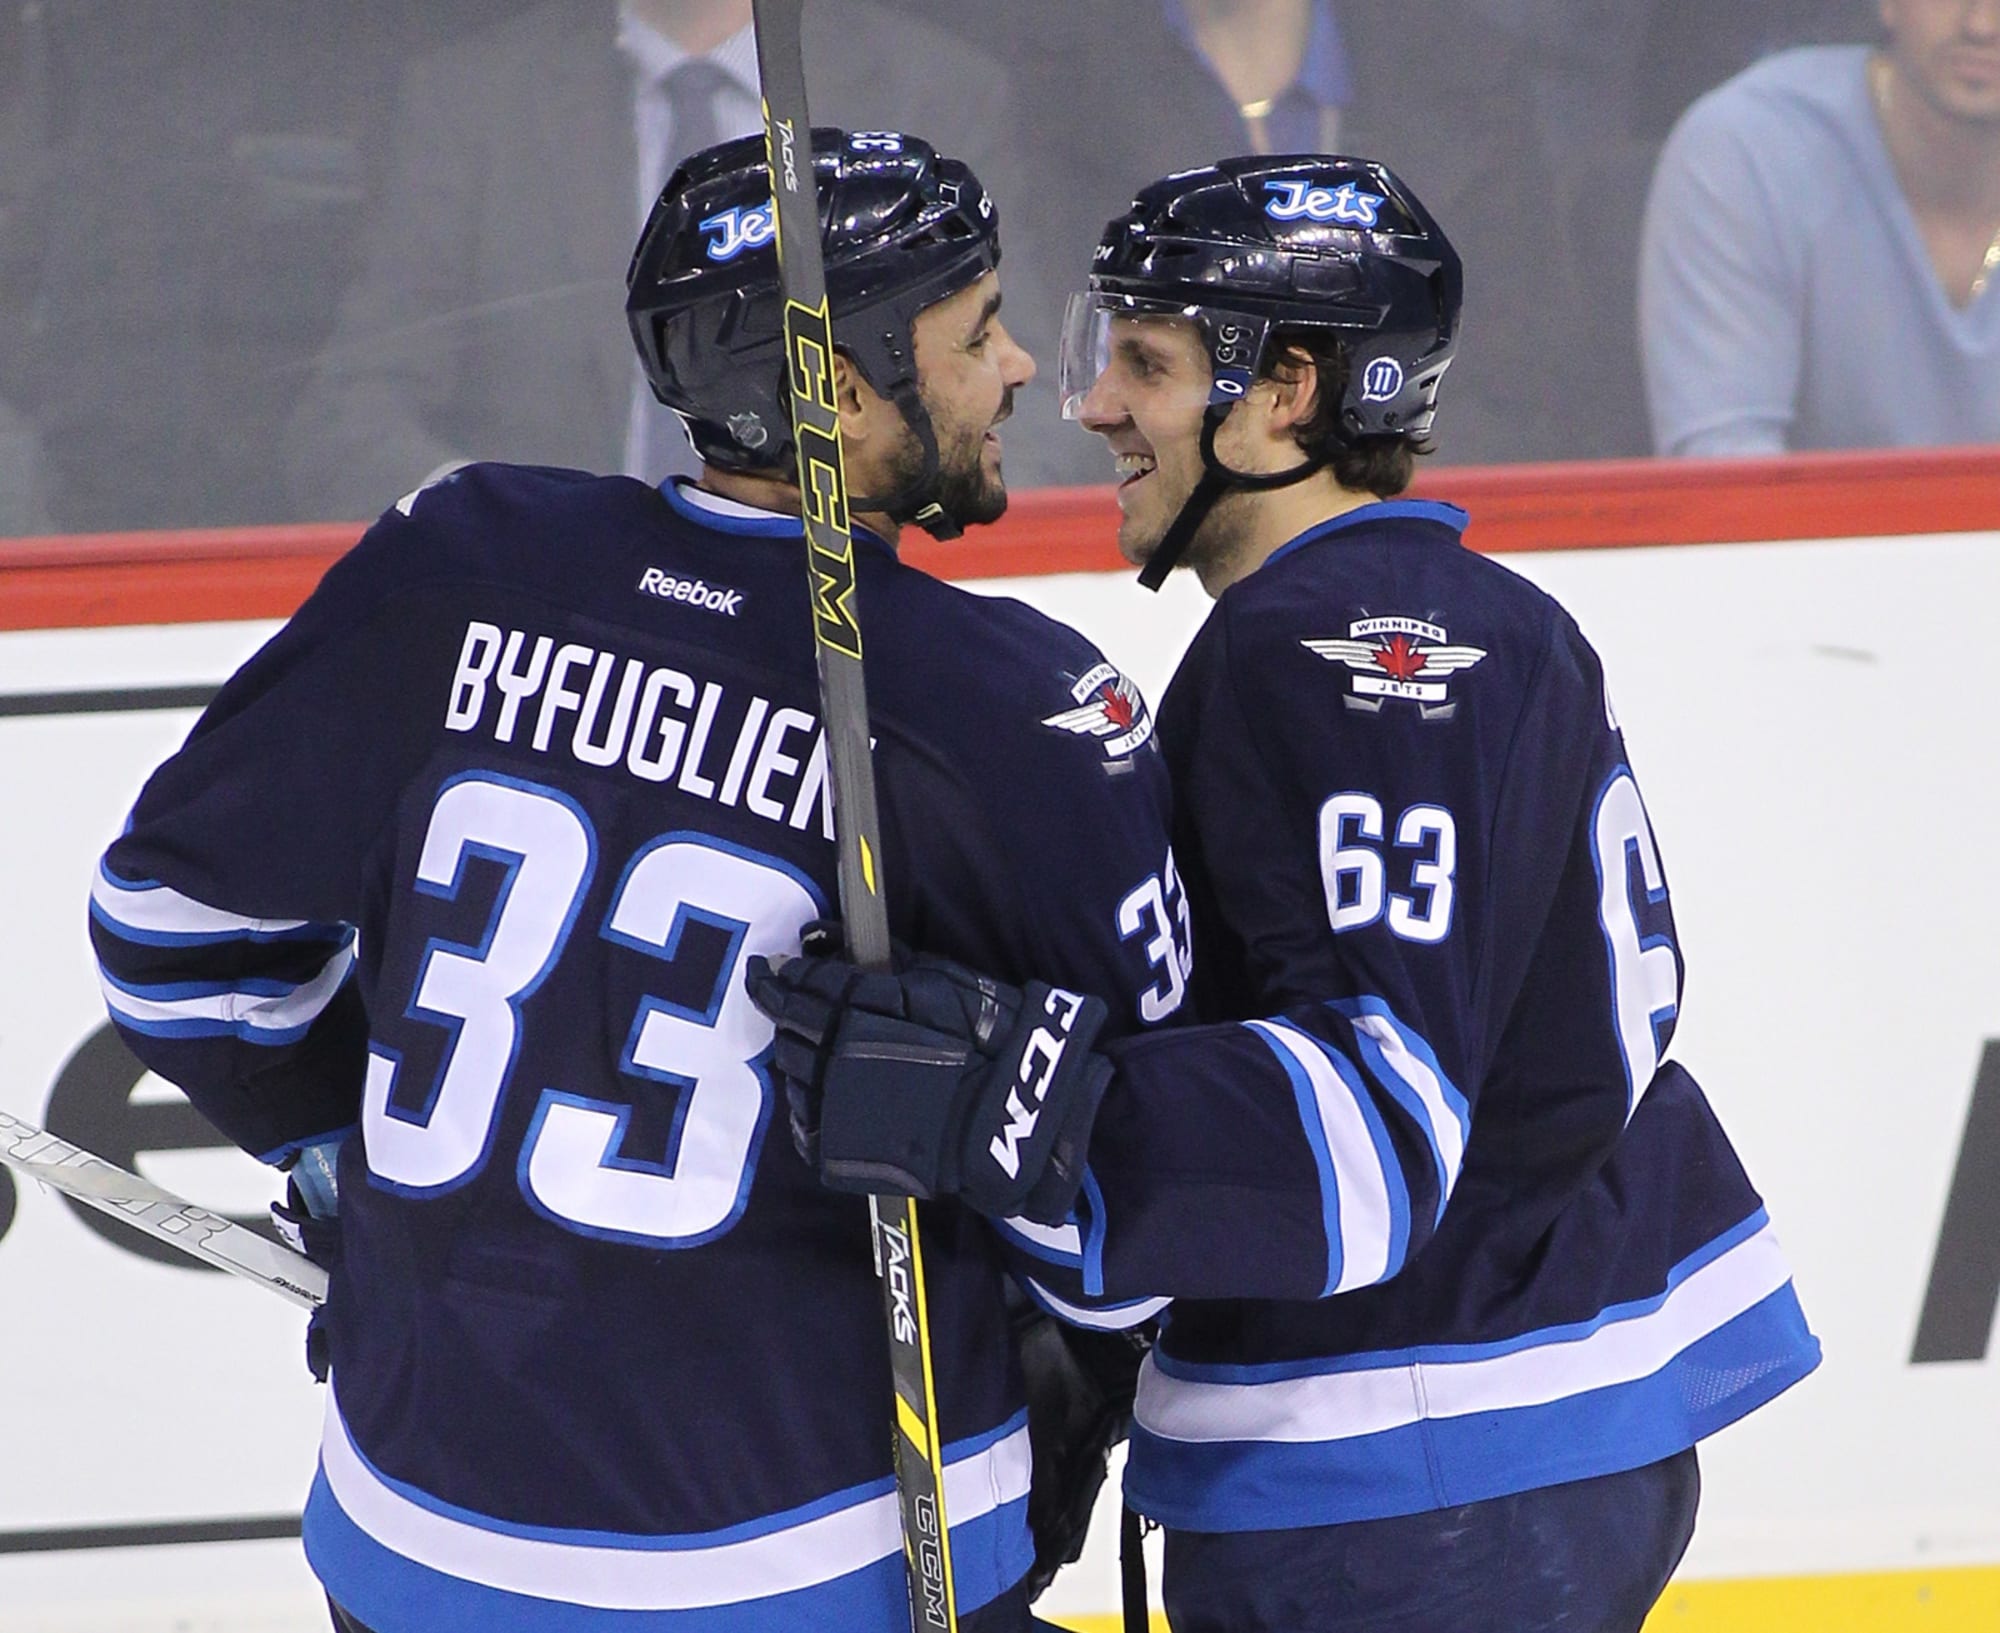 Former Jets defenceman Dustin Byfuglien unlikely to play in NHL again